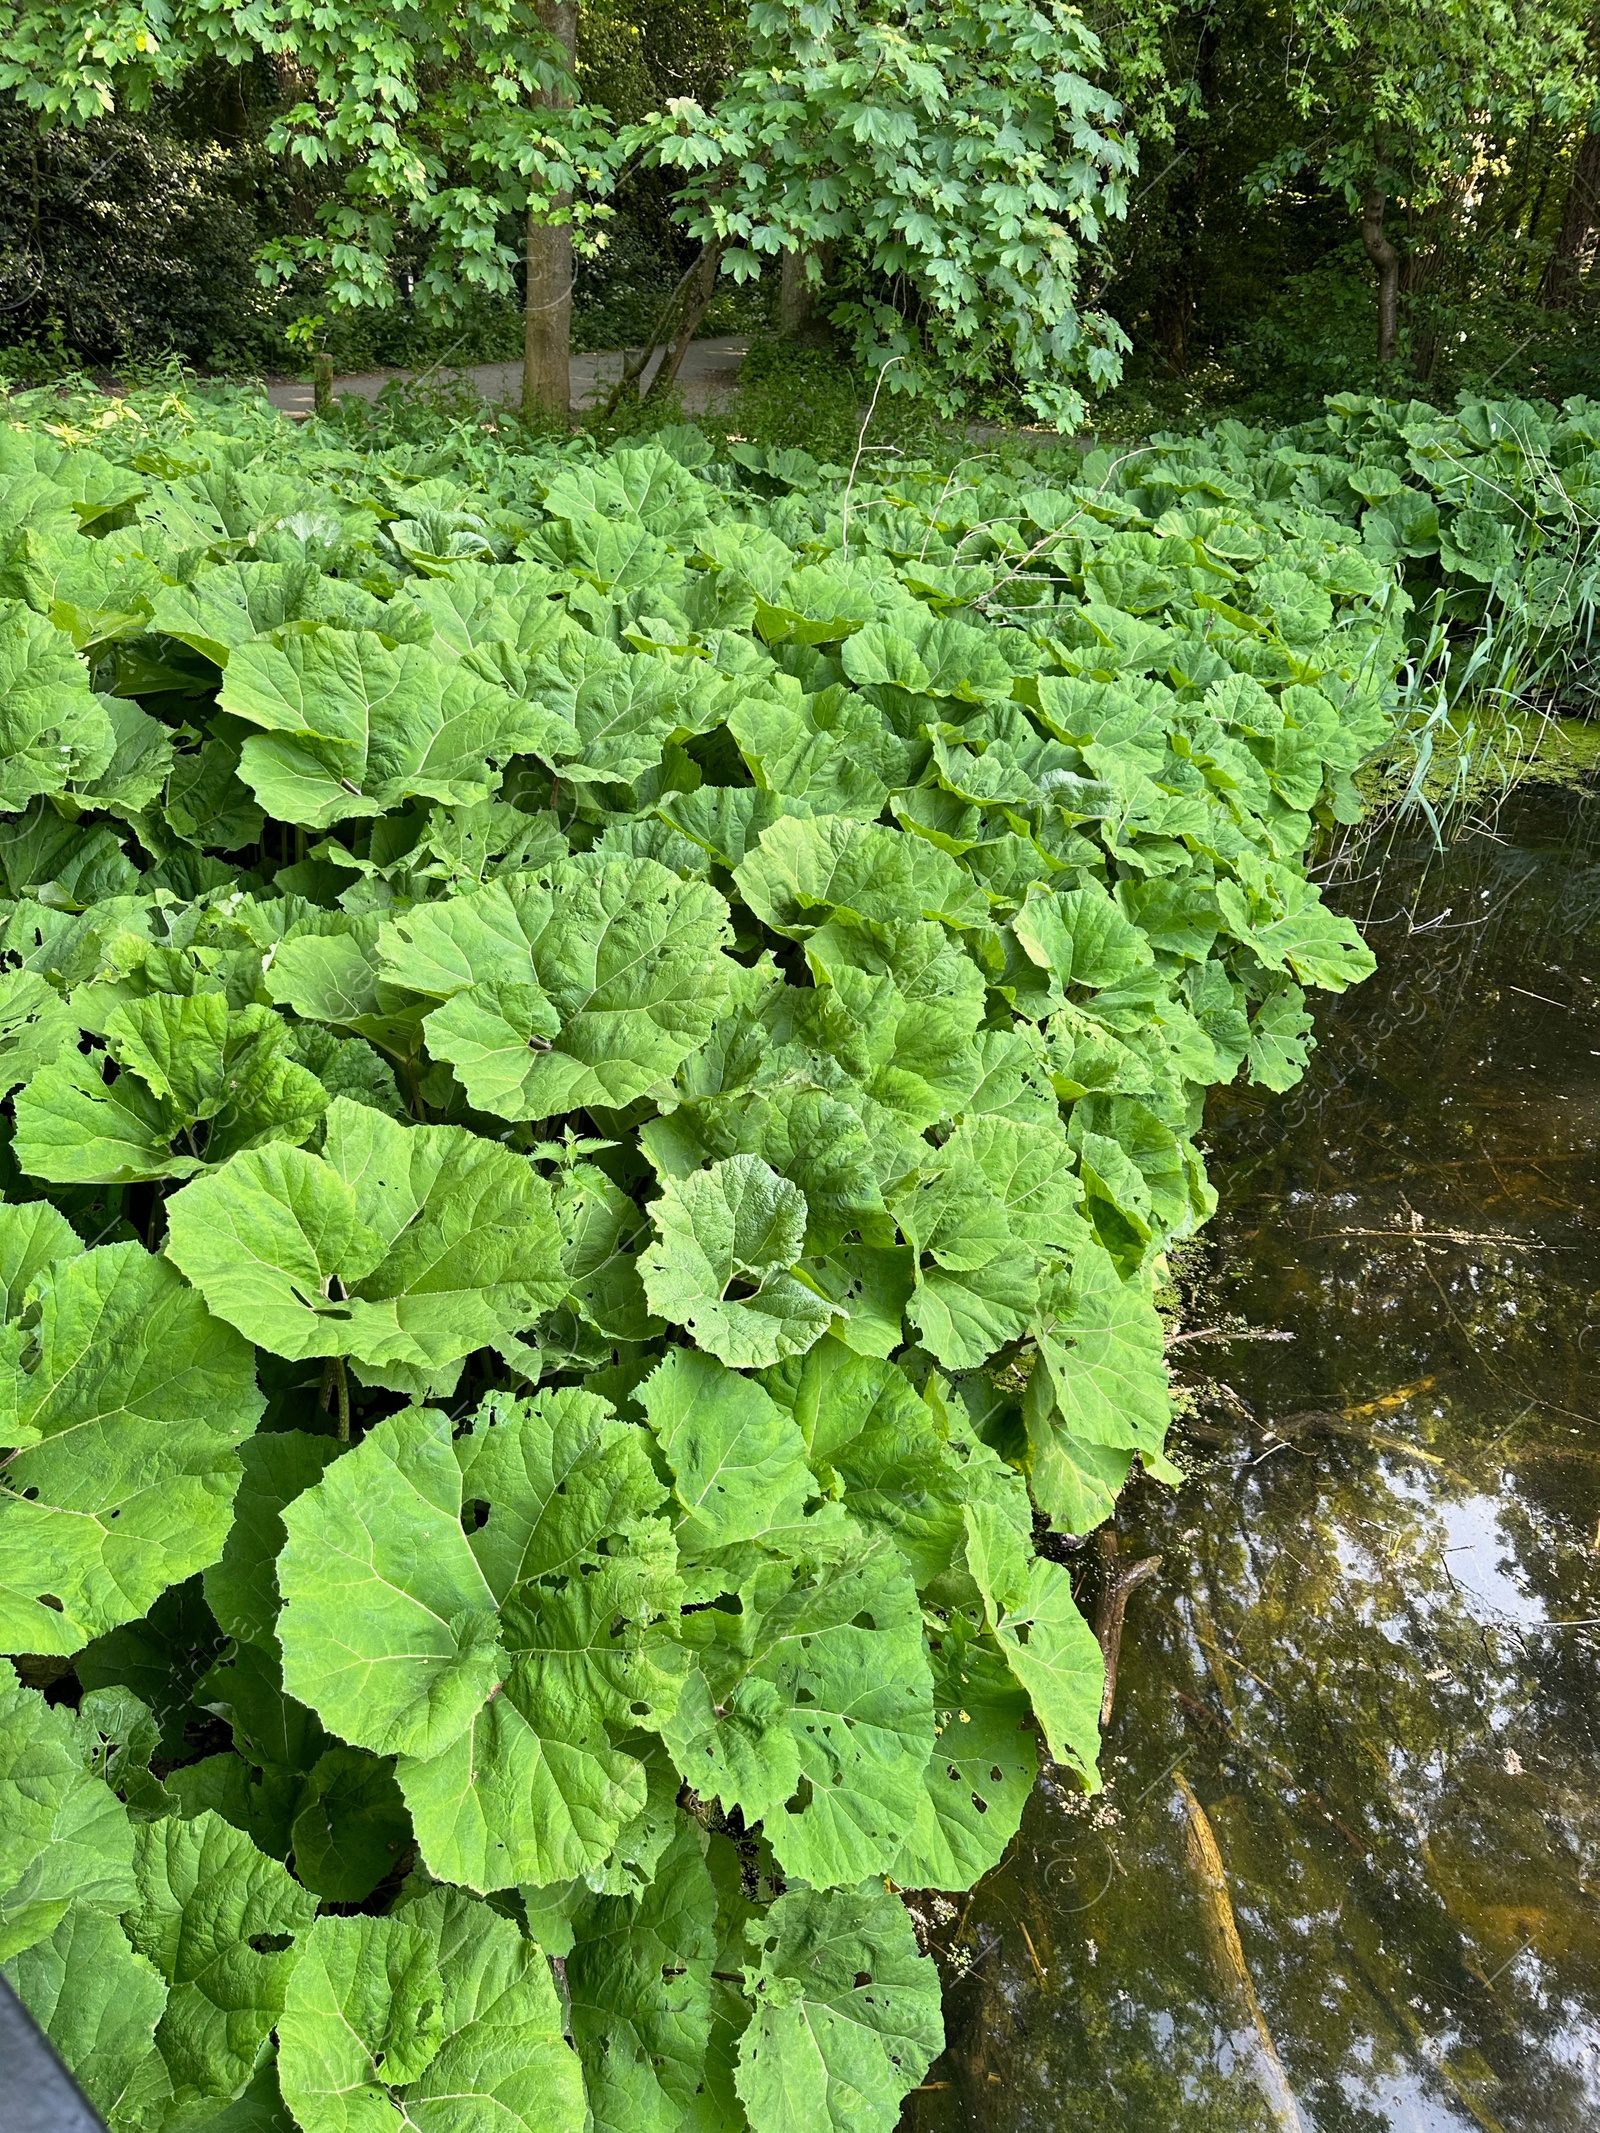 Photo of Butterbur plants with green leaves growing on riverside